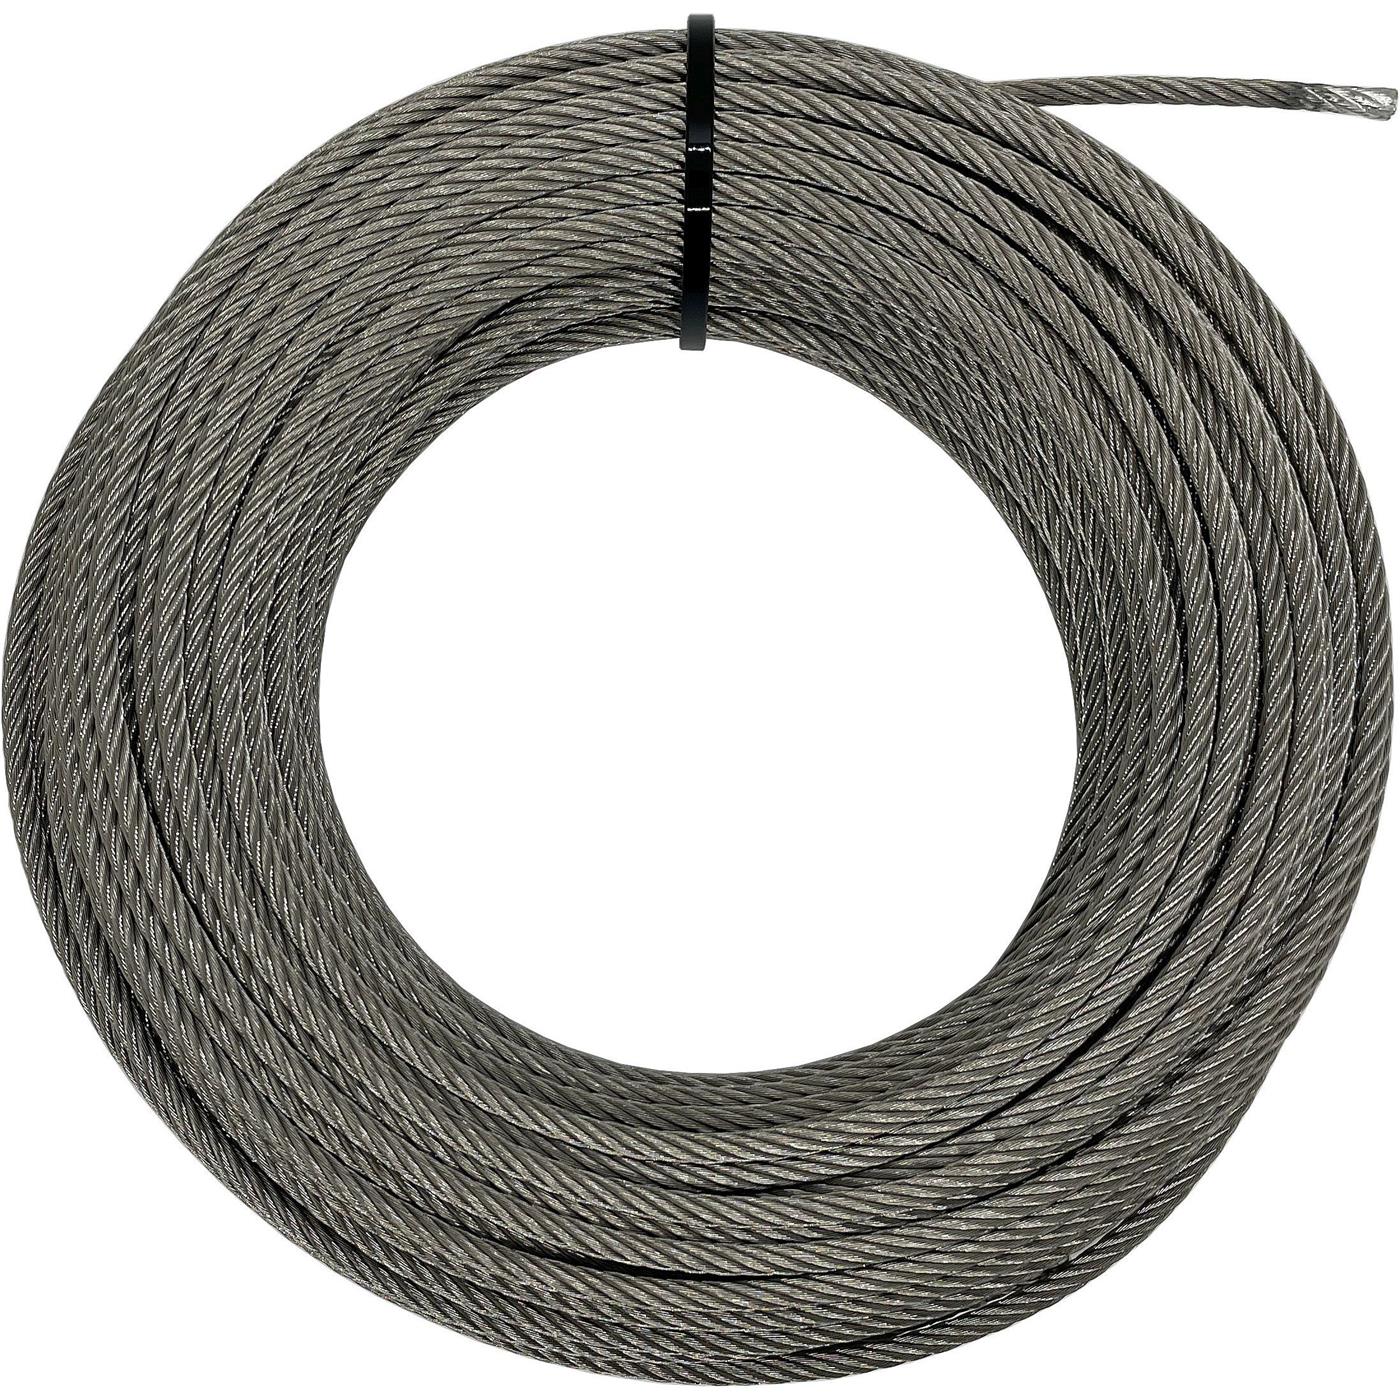 Wire rope 50m Stainless steel V4A 316 5mm 7x19 Ropes stainless for trellis systems